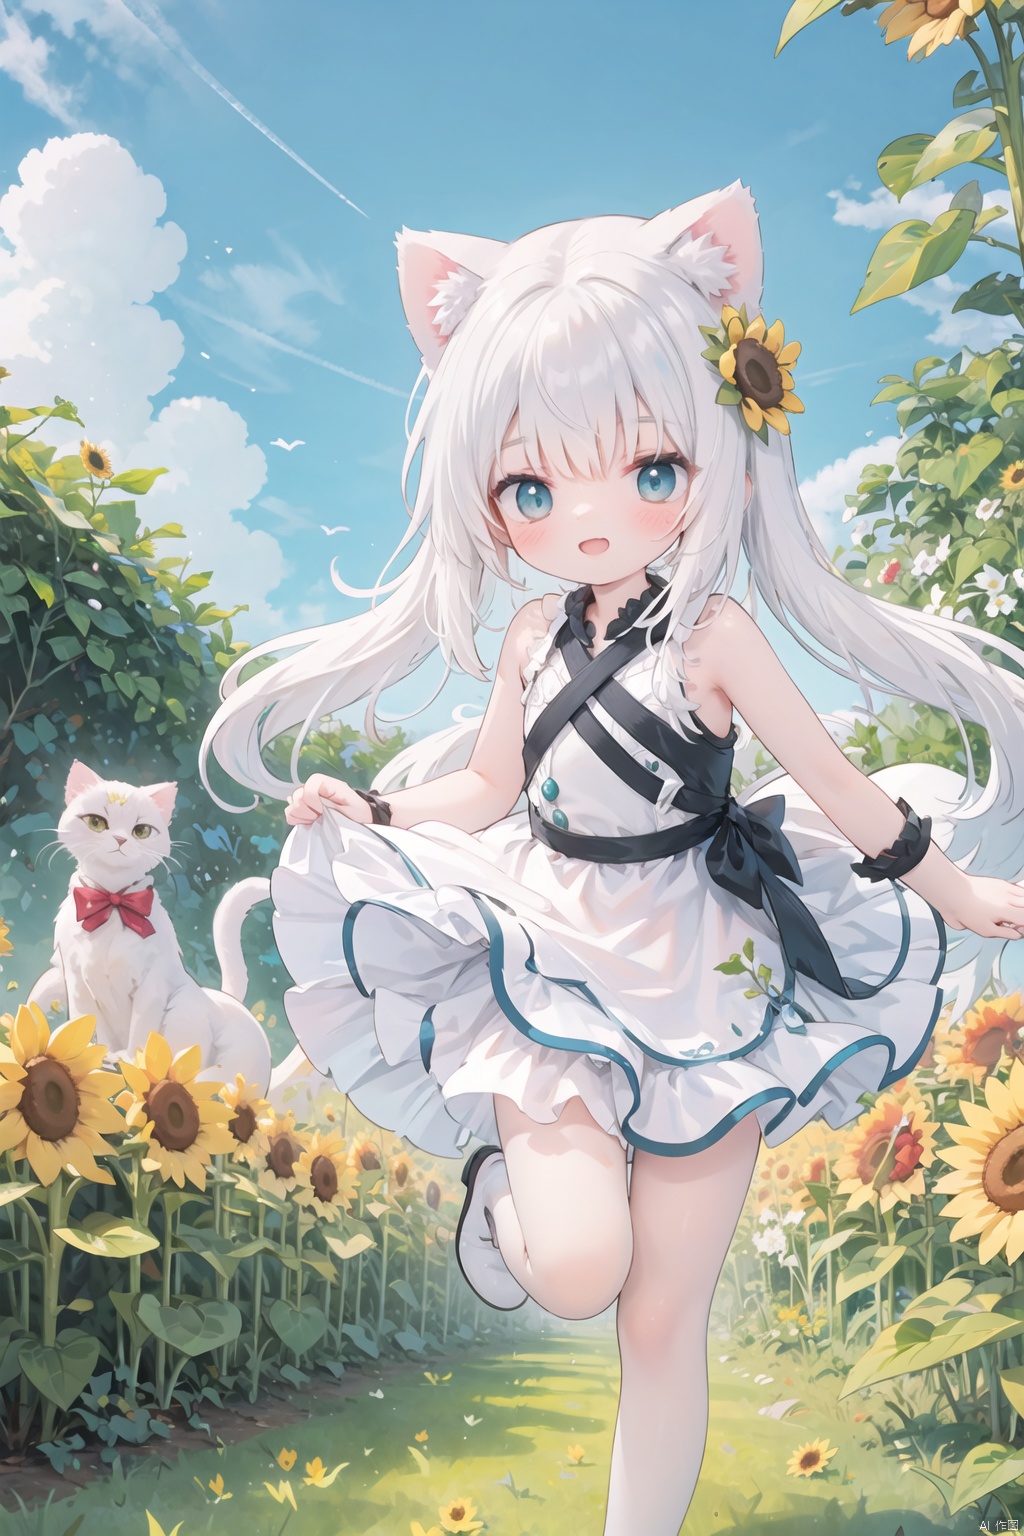  (aesthetic, digital art), a digital illustration of a lively cat-girl with long white hair, dressed in a flowing white dress, energetically running through a field of vibrant sunflowers, (anime style:1.2), playful and cheerful expression, (cat ears:1.2), endearing feline features, (sunflowers:1.3), radiant and joyful blooms, dancing in the gentle breeze, (whimsical:1.1), enchanting and magical ambiance, (flower field:1.3), an expansive meadow adorned with sunflowers as far as the eye can see, (white dress:1.2), ethereal and graceful, accentuating her youthful charm, (nature scenery:1.2), clear blue sky, lush green grass, (sunshine:1.2), warm sunlight filtering through the white dress, illuminating her delicate figure, (happiness:1.1), pure joy and liveliness, (running motion:1.2), dynamic and carefree, her long white hair trailing behind her as she dashes through the sunflower field, her petite figure adding to her adorable appeal.